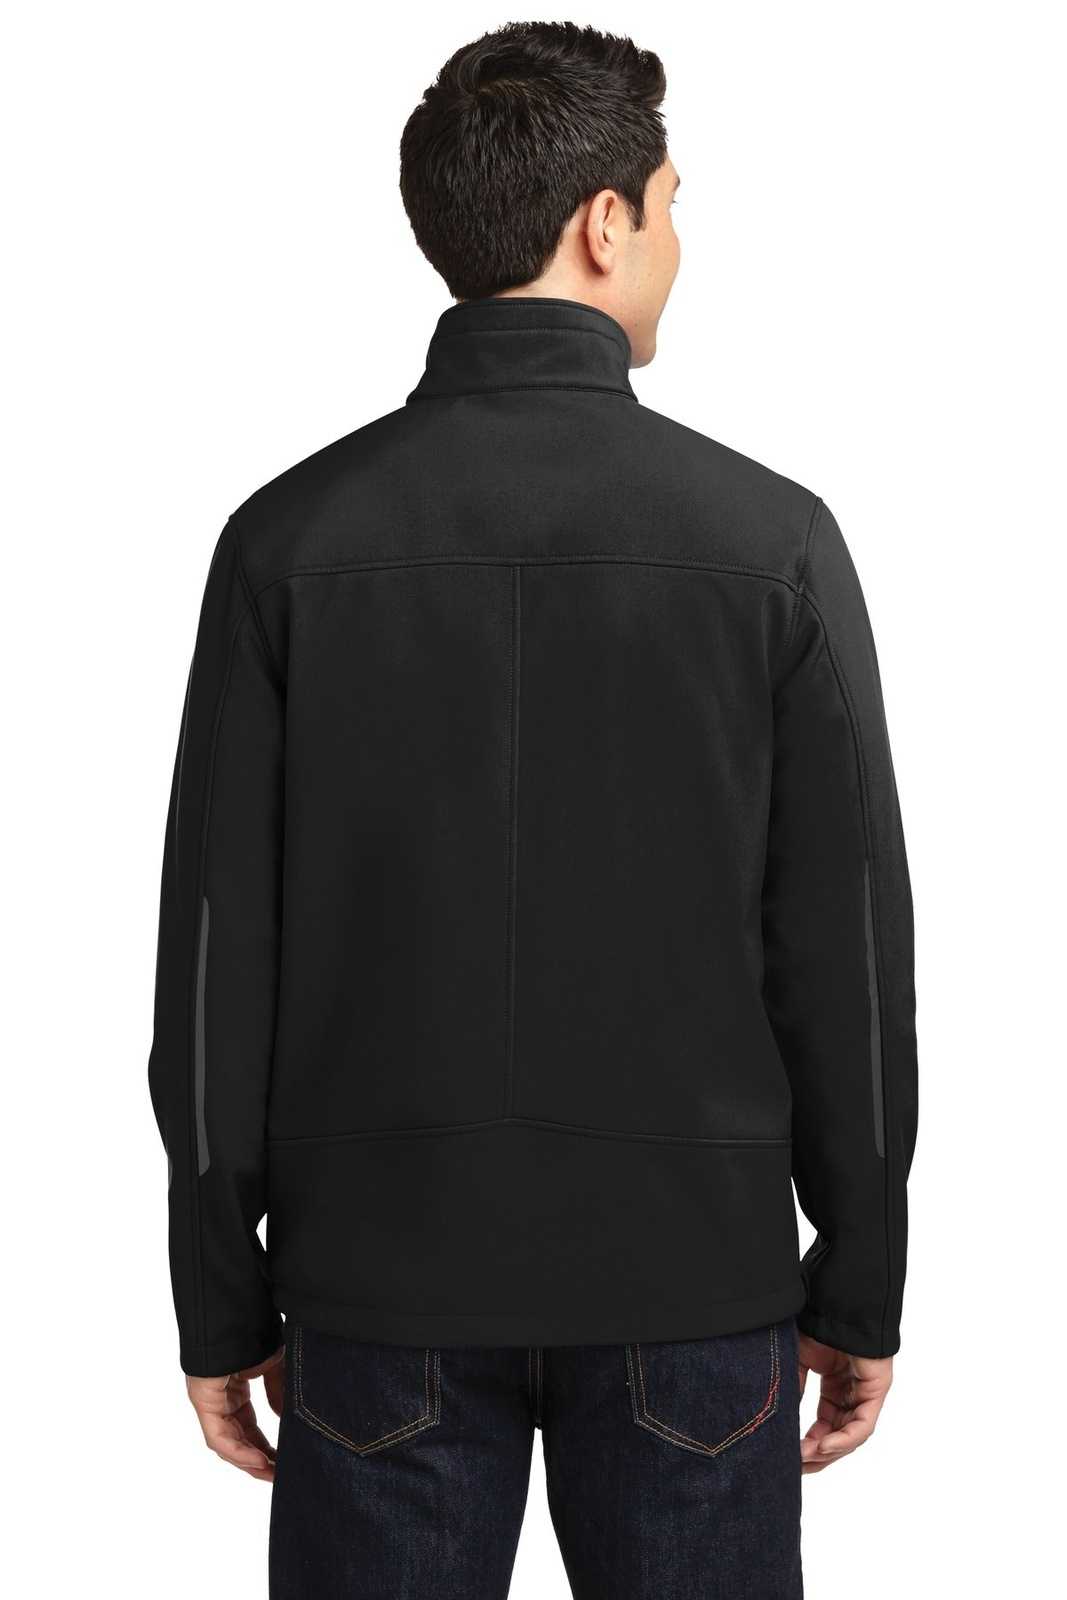 Port Authority J324 Welded Soft Shell Jacket - Black - HIT a Double - 2